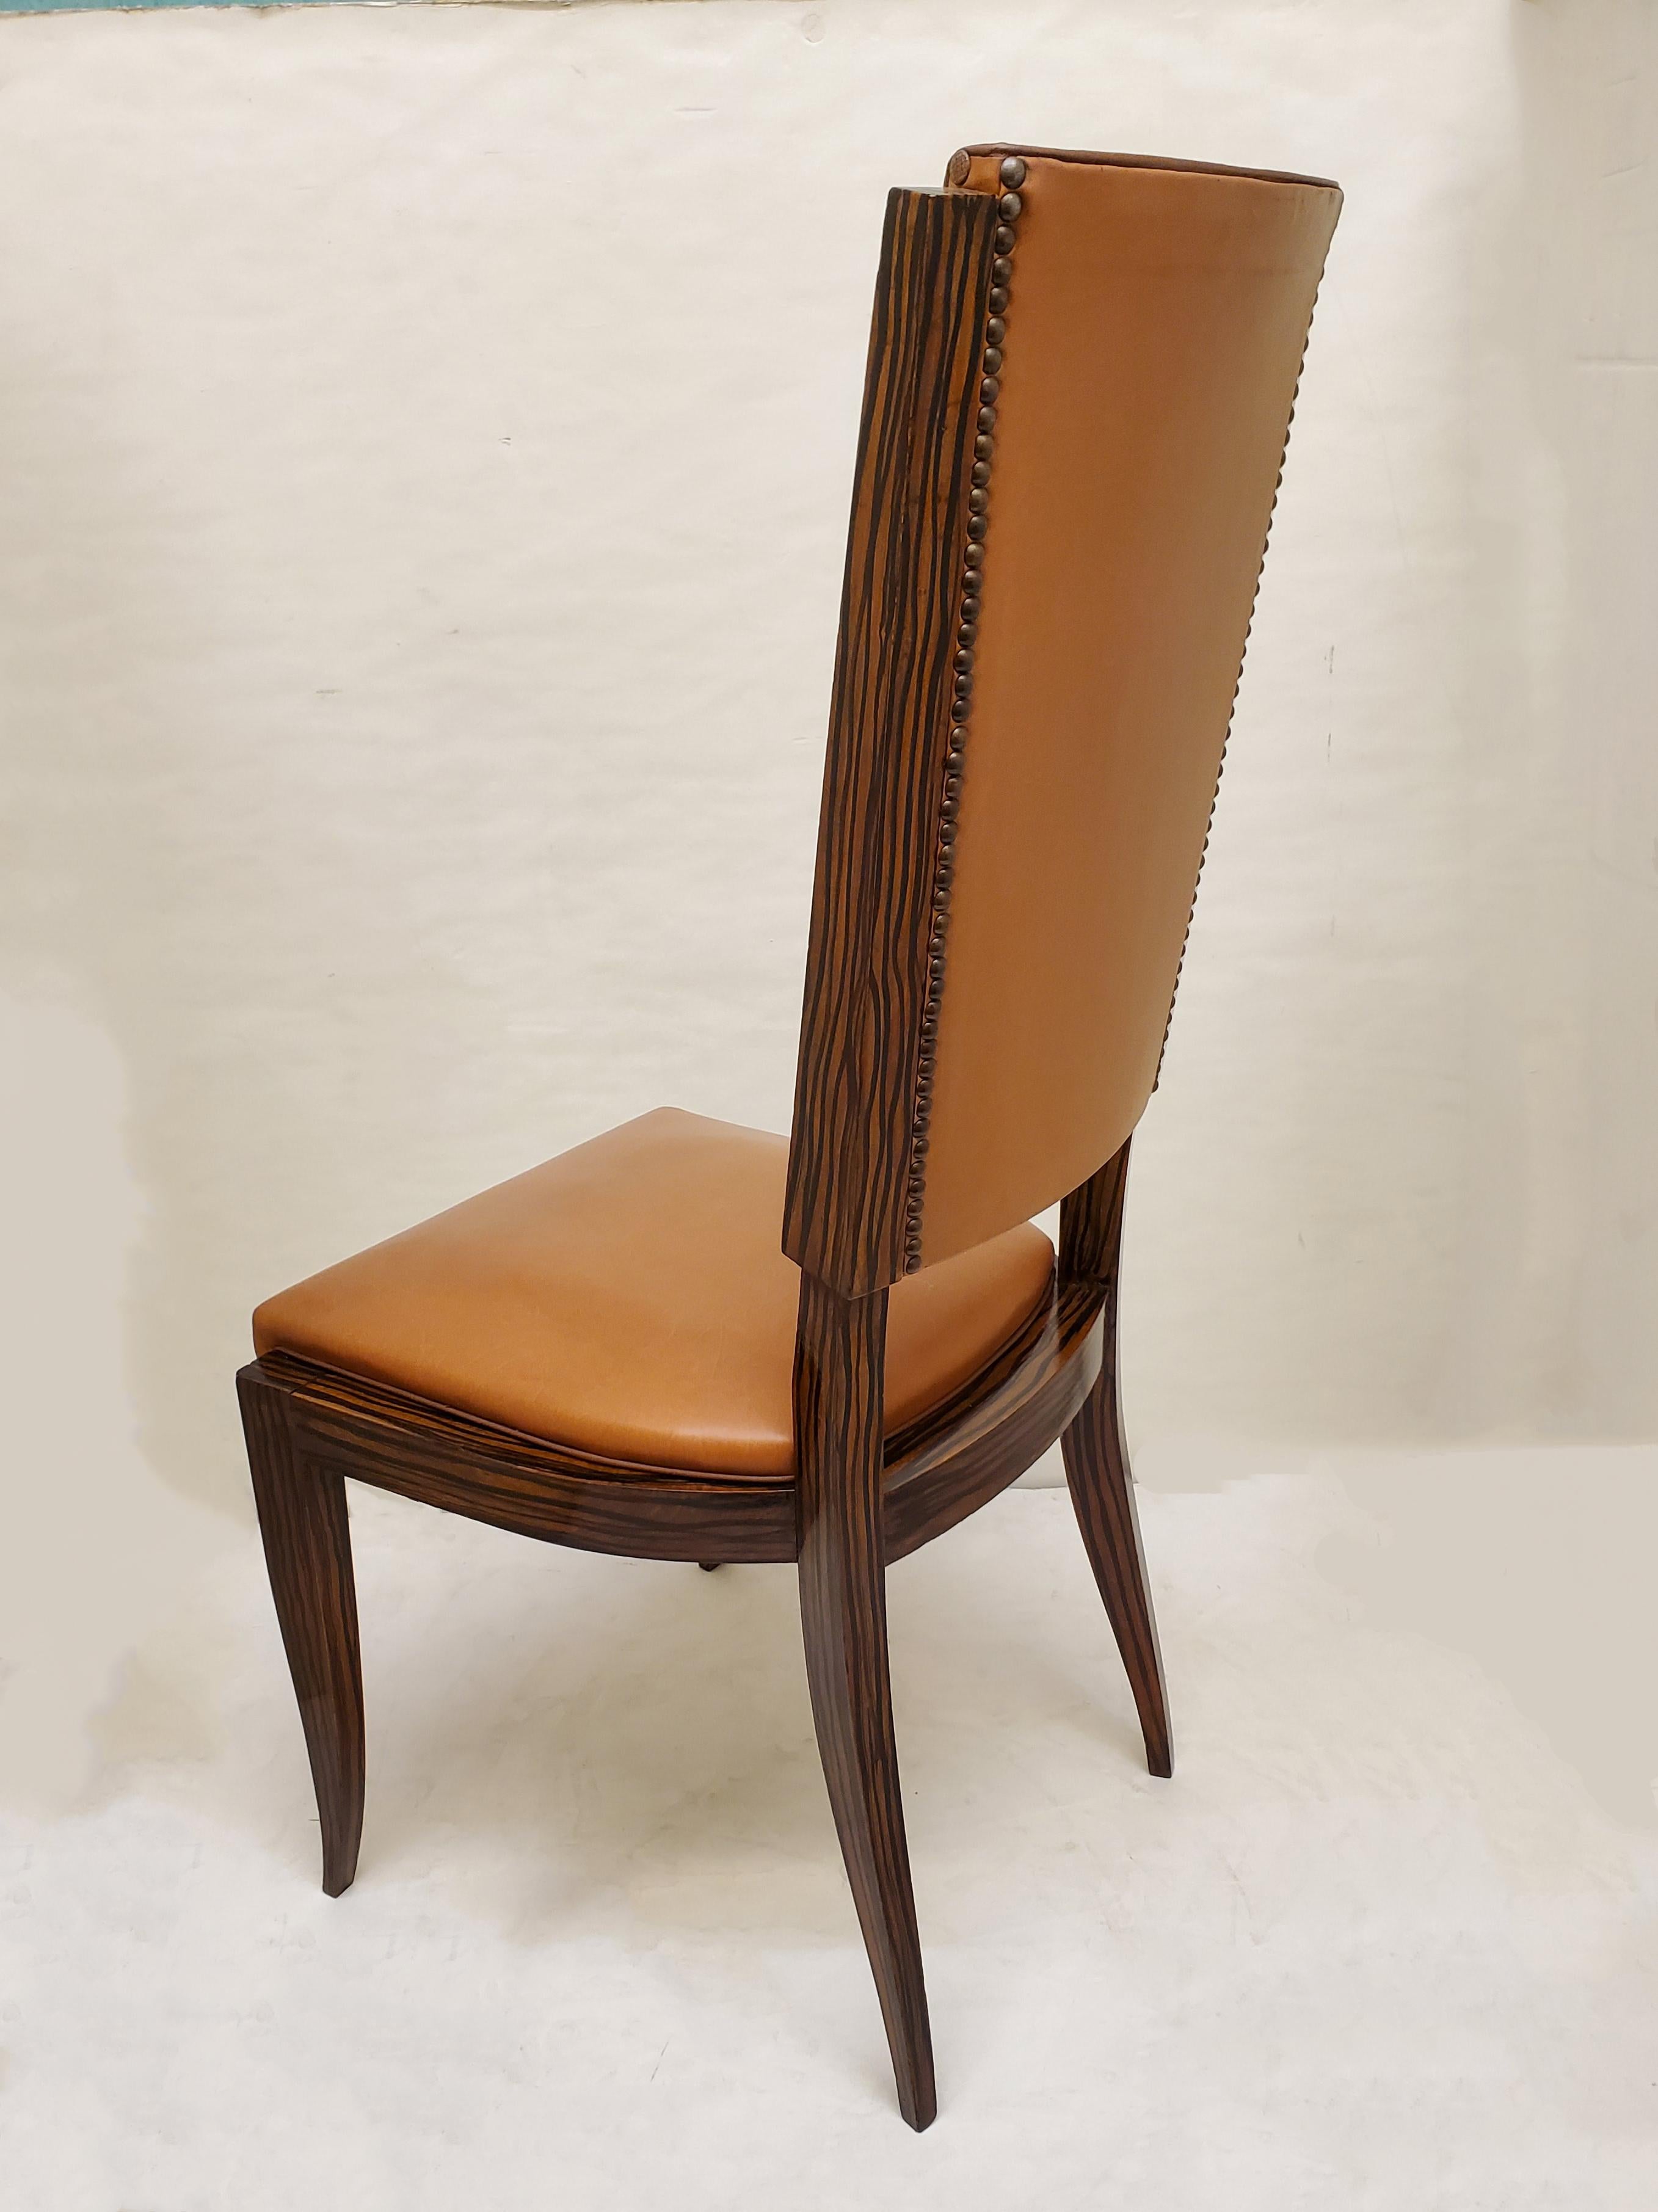 20th Century Set of Six Original French Art Deco Faux Macassar Ebony Wood Dining Chairs For Sale